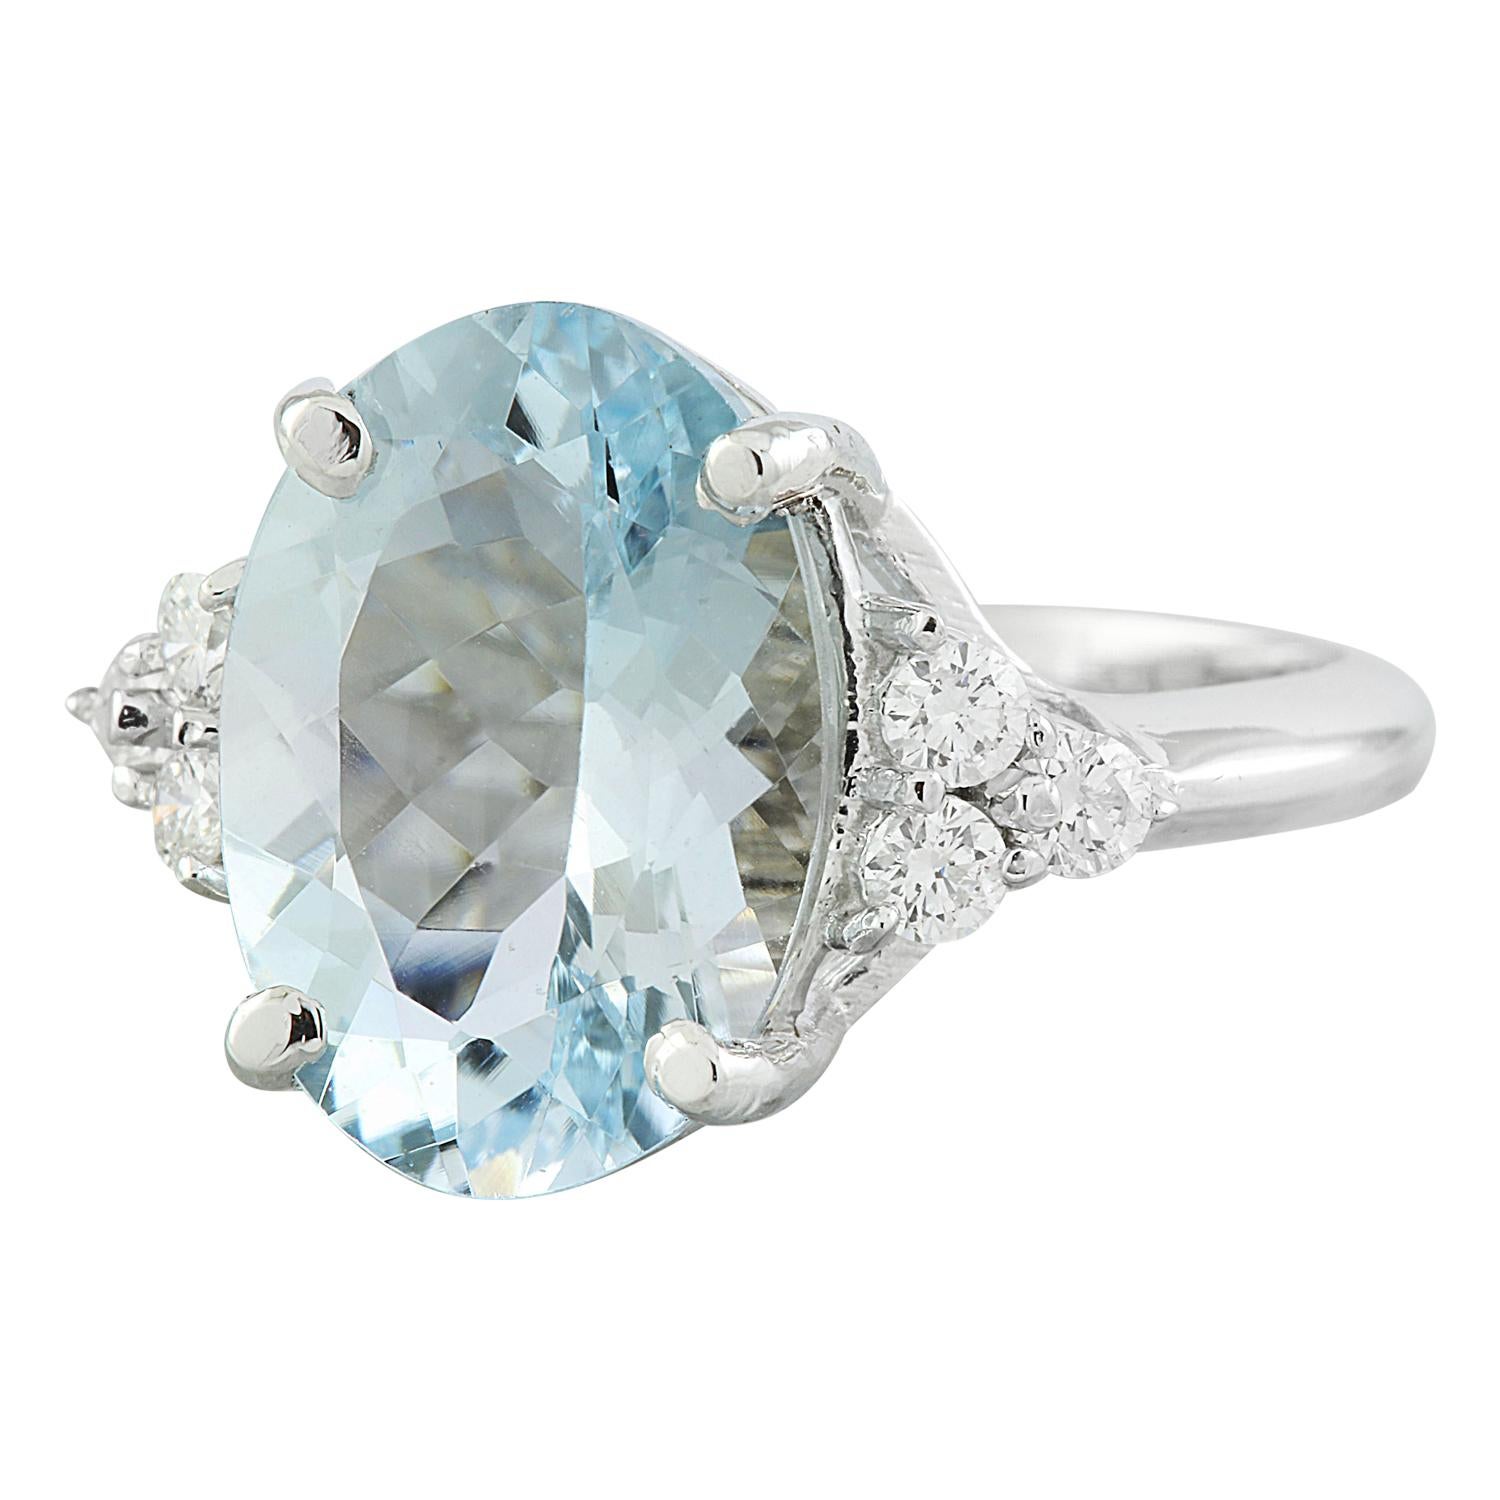 Embrace the allure of understated elegance with this mesmerizing Natural Aquamarine Diamond Ring, meticulously crafted in solid 14K White Gold. Weighing an impressive 5.32 carats in total, this ring is a true statement piece, exuding grace and